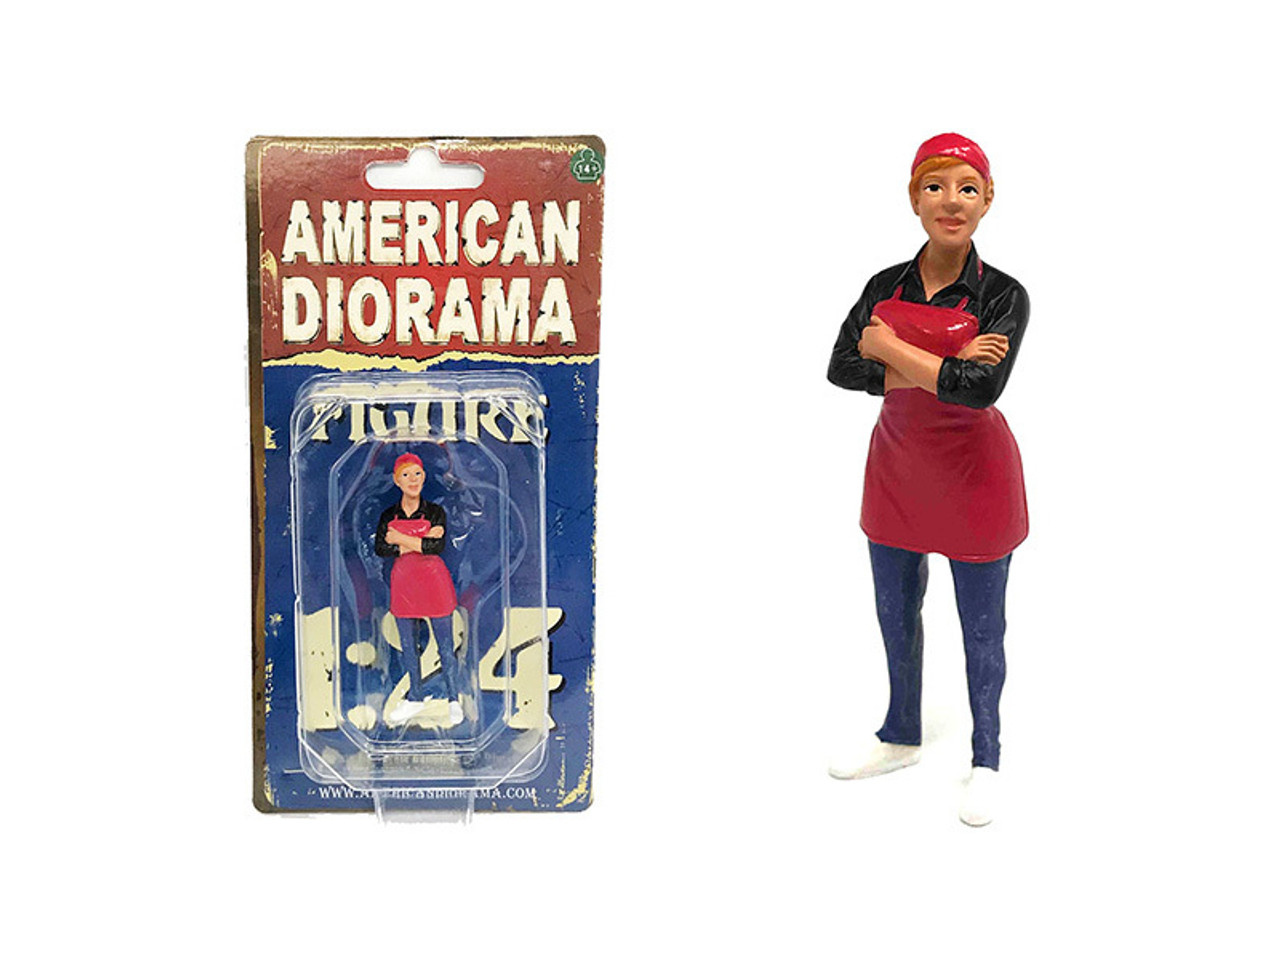 Food Truck Chef Gloria Figure for 1/24 Scale Models by American Diorama